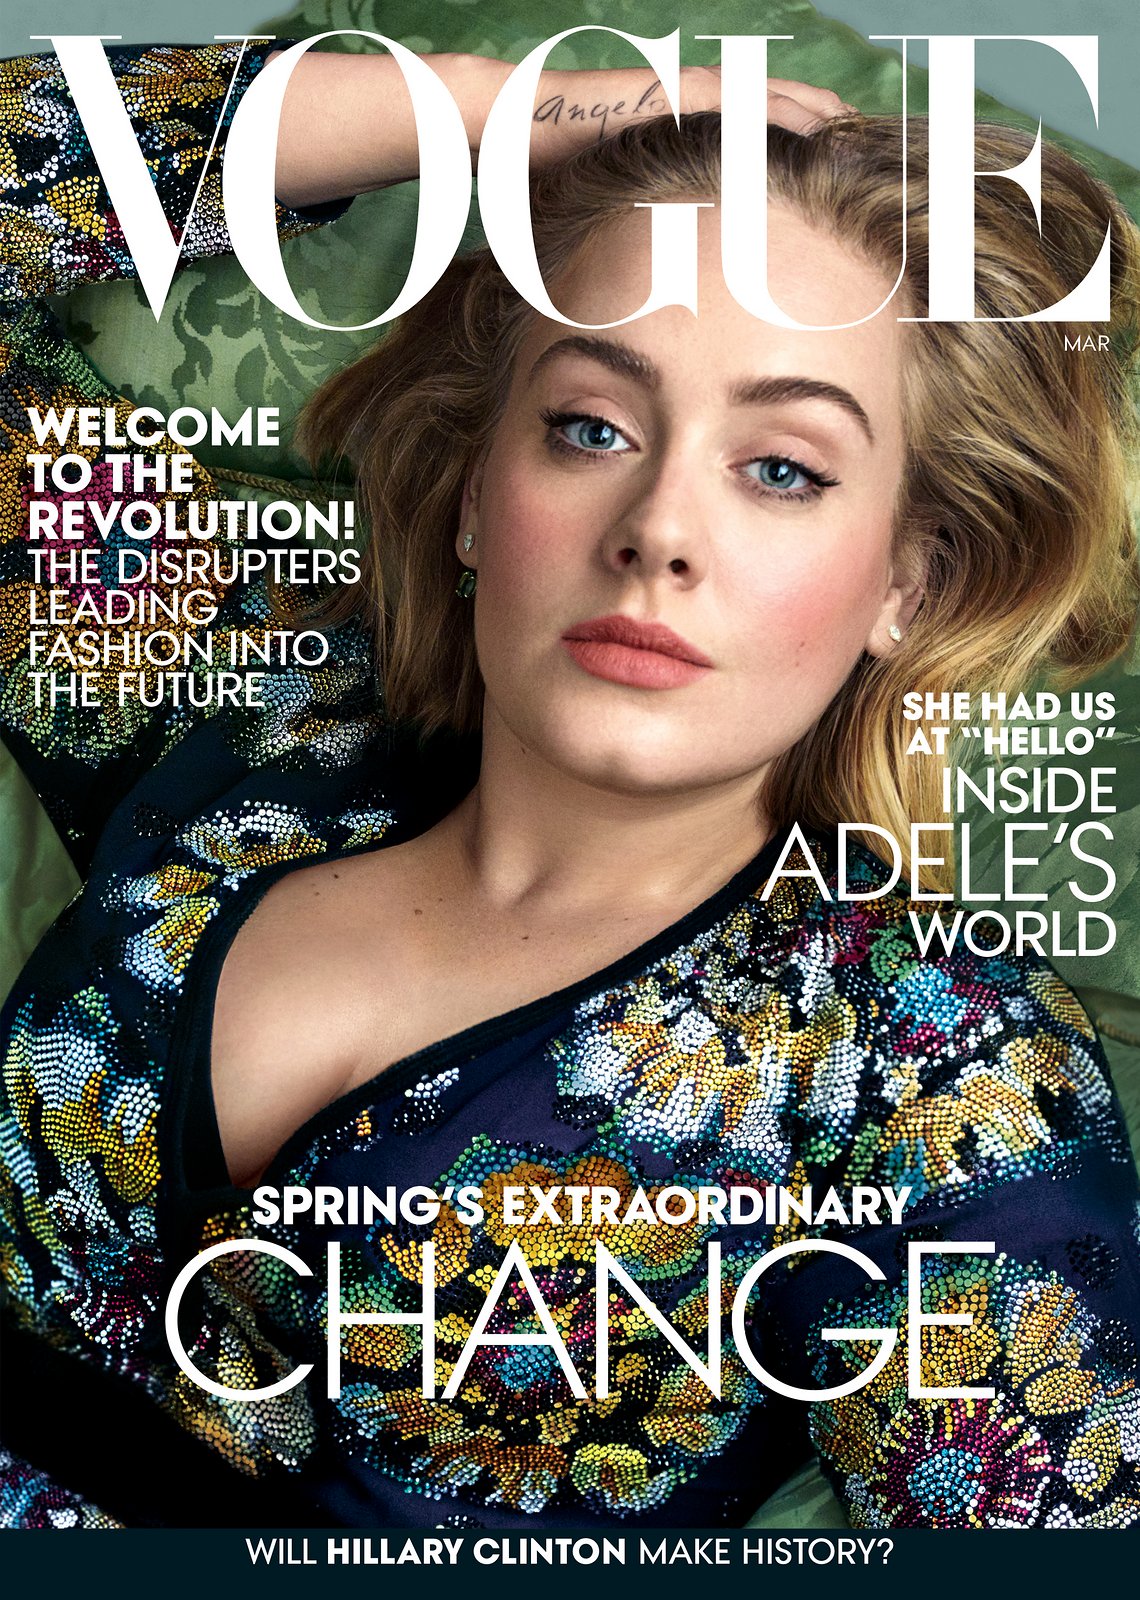 Adele covers Vogue